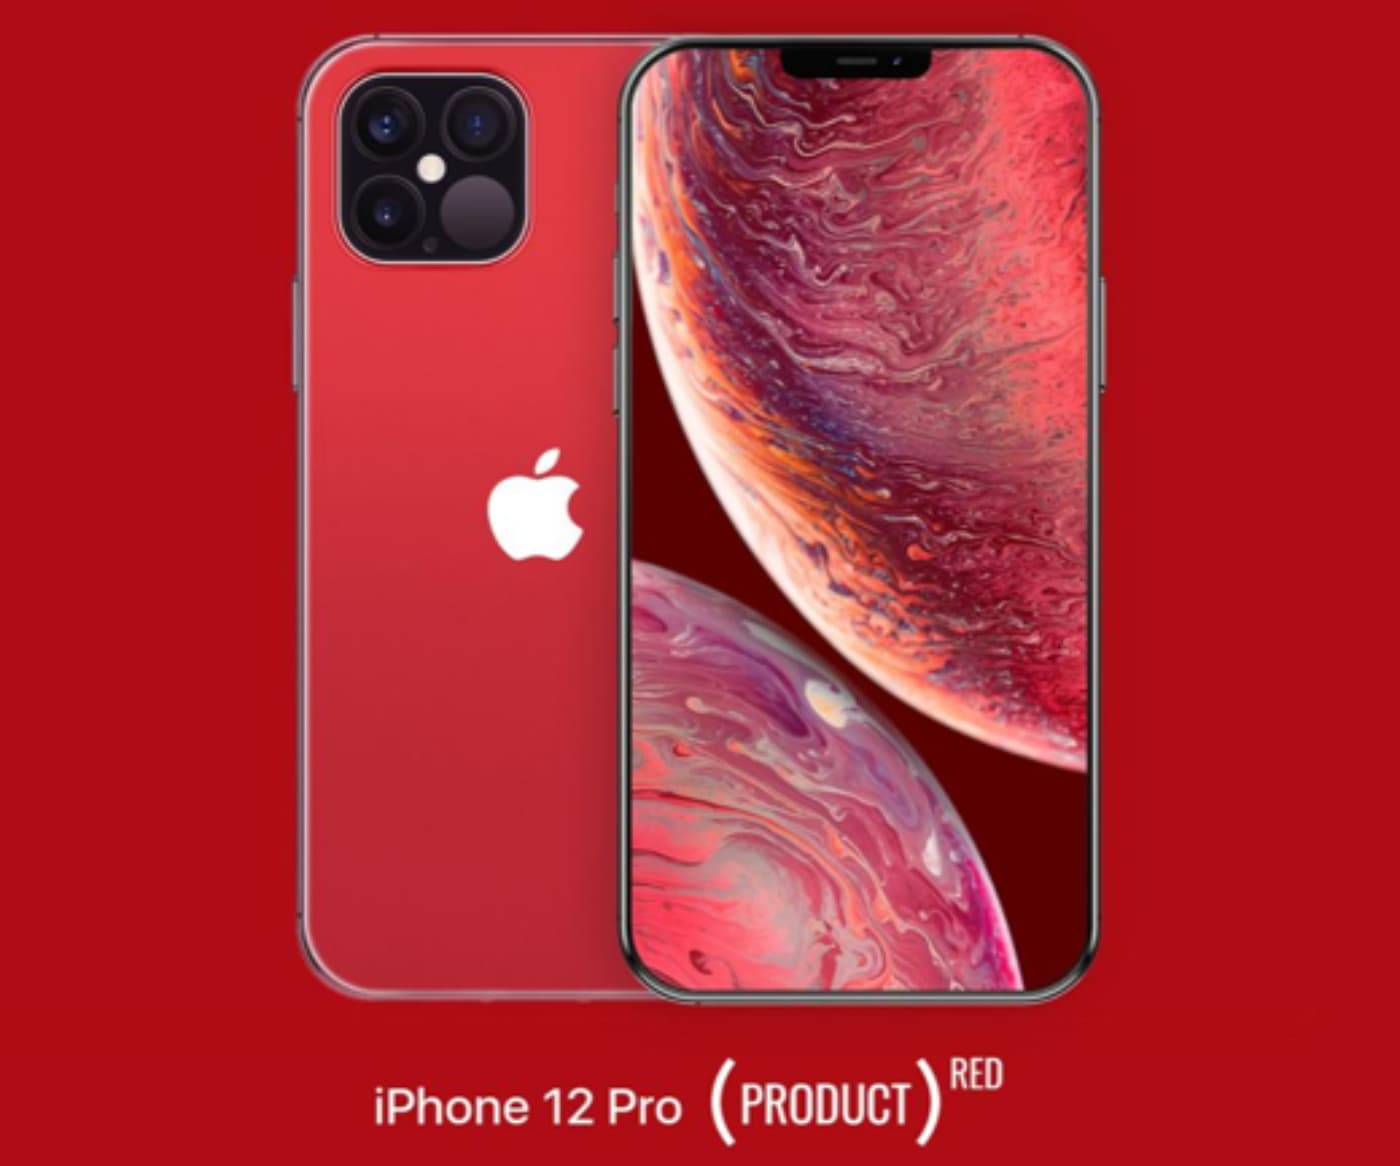 Apple's 2020 iPhones Said to Launch Starting in Late October Due to Coronavirus Delays